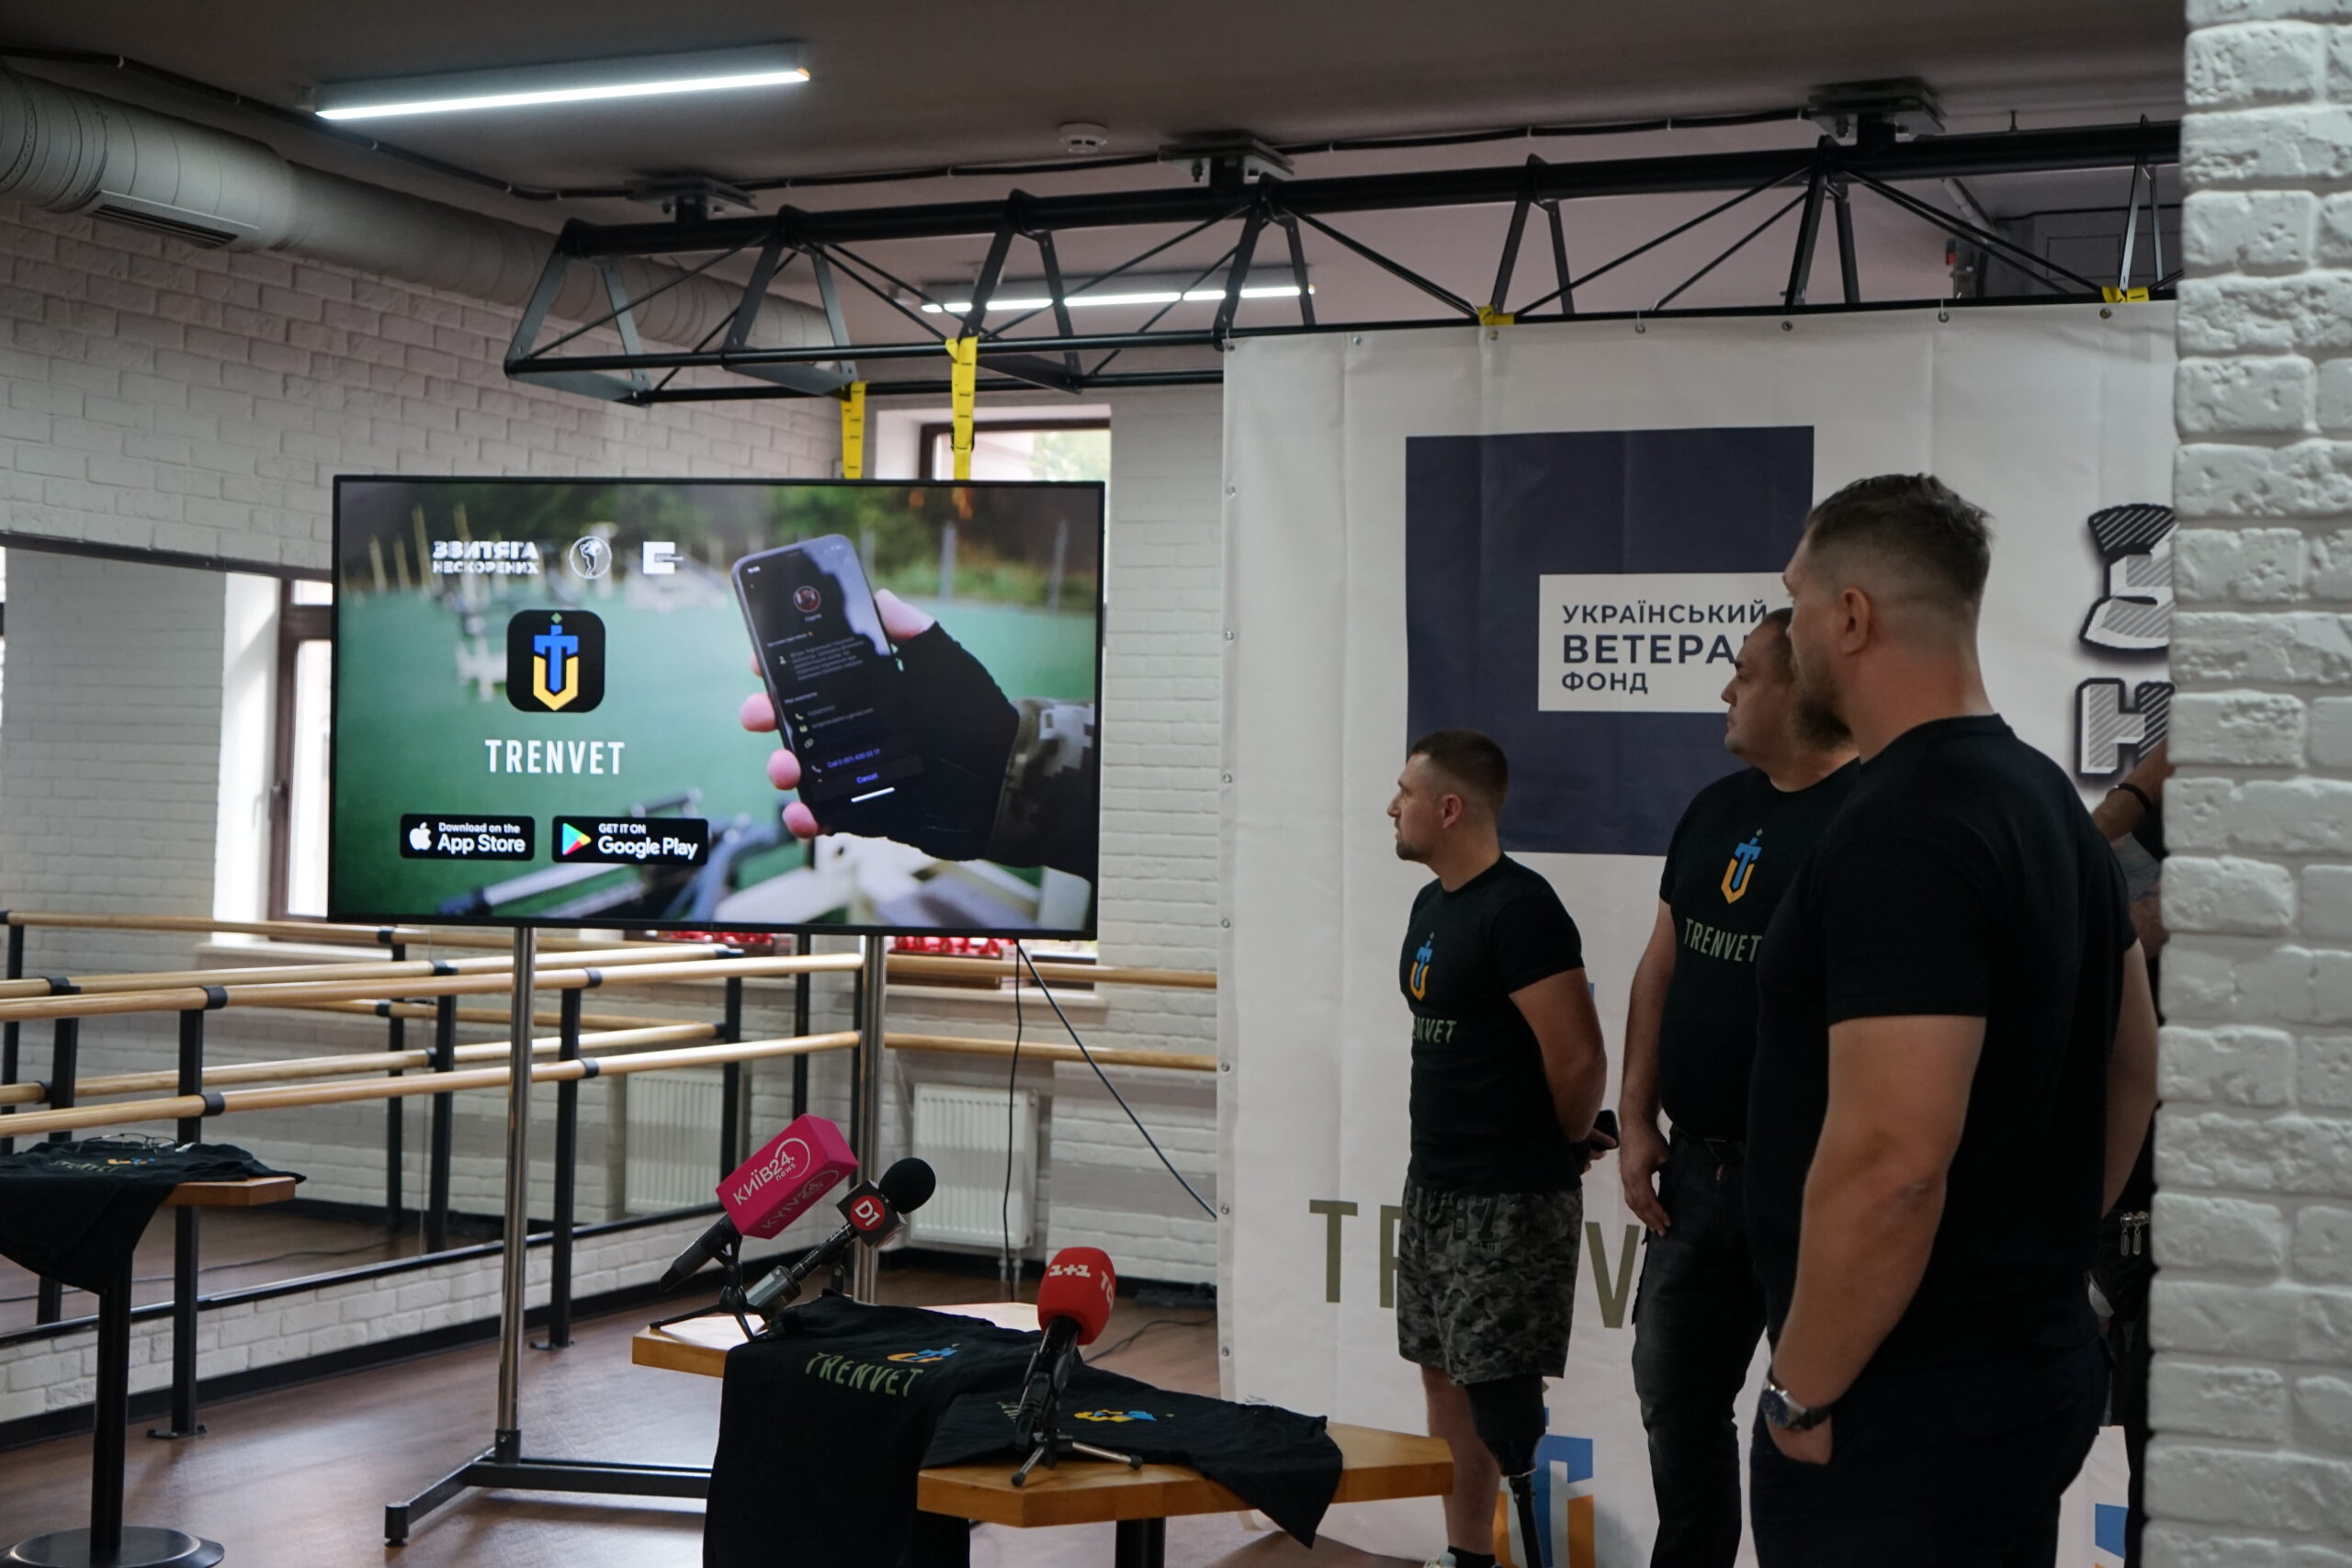 A unique application for sports rehabilitation of TRENVET veterans was presented in Kyiv